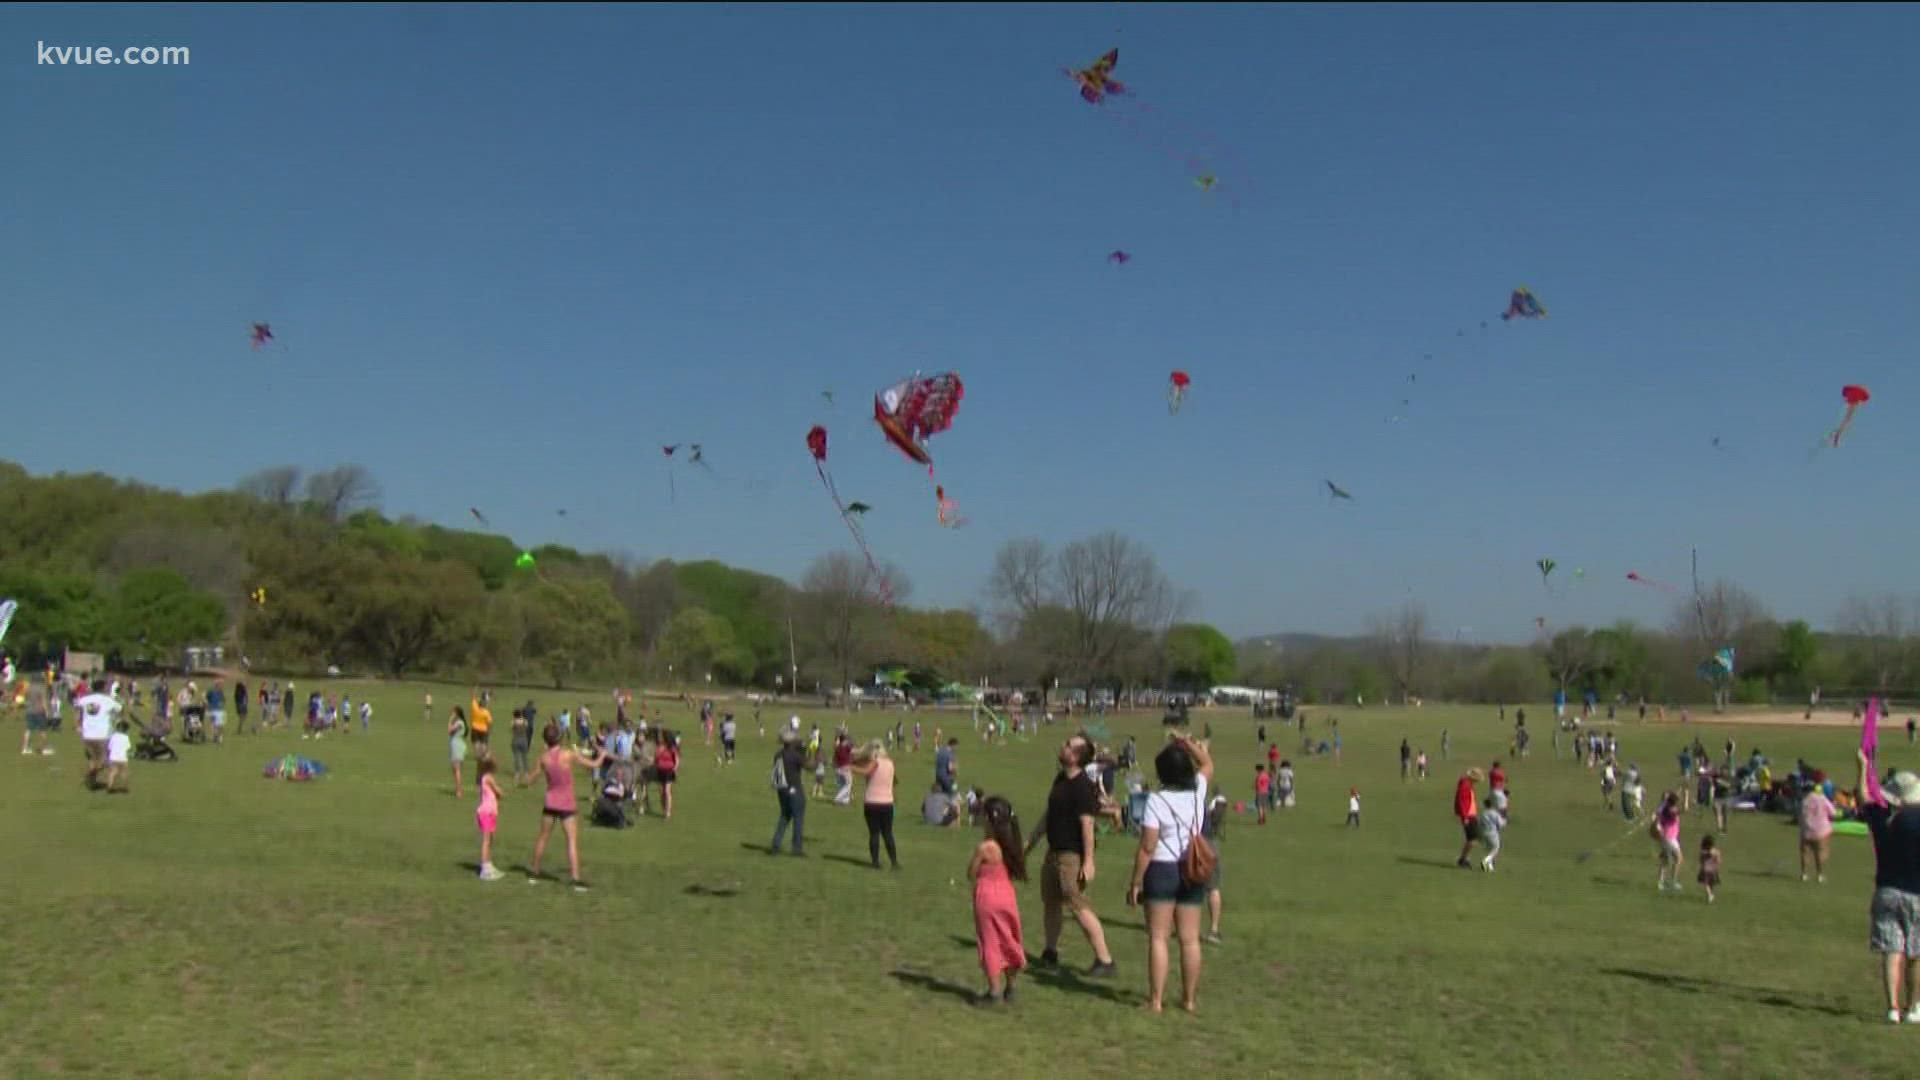 Community members flocked to Zilker Park on Sunday to fly kites as part of Kite Fest for the first time in two years.